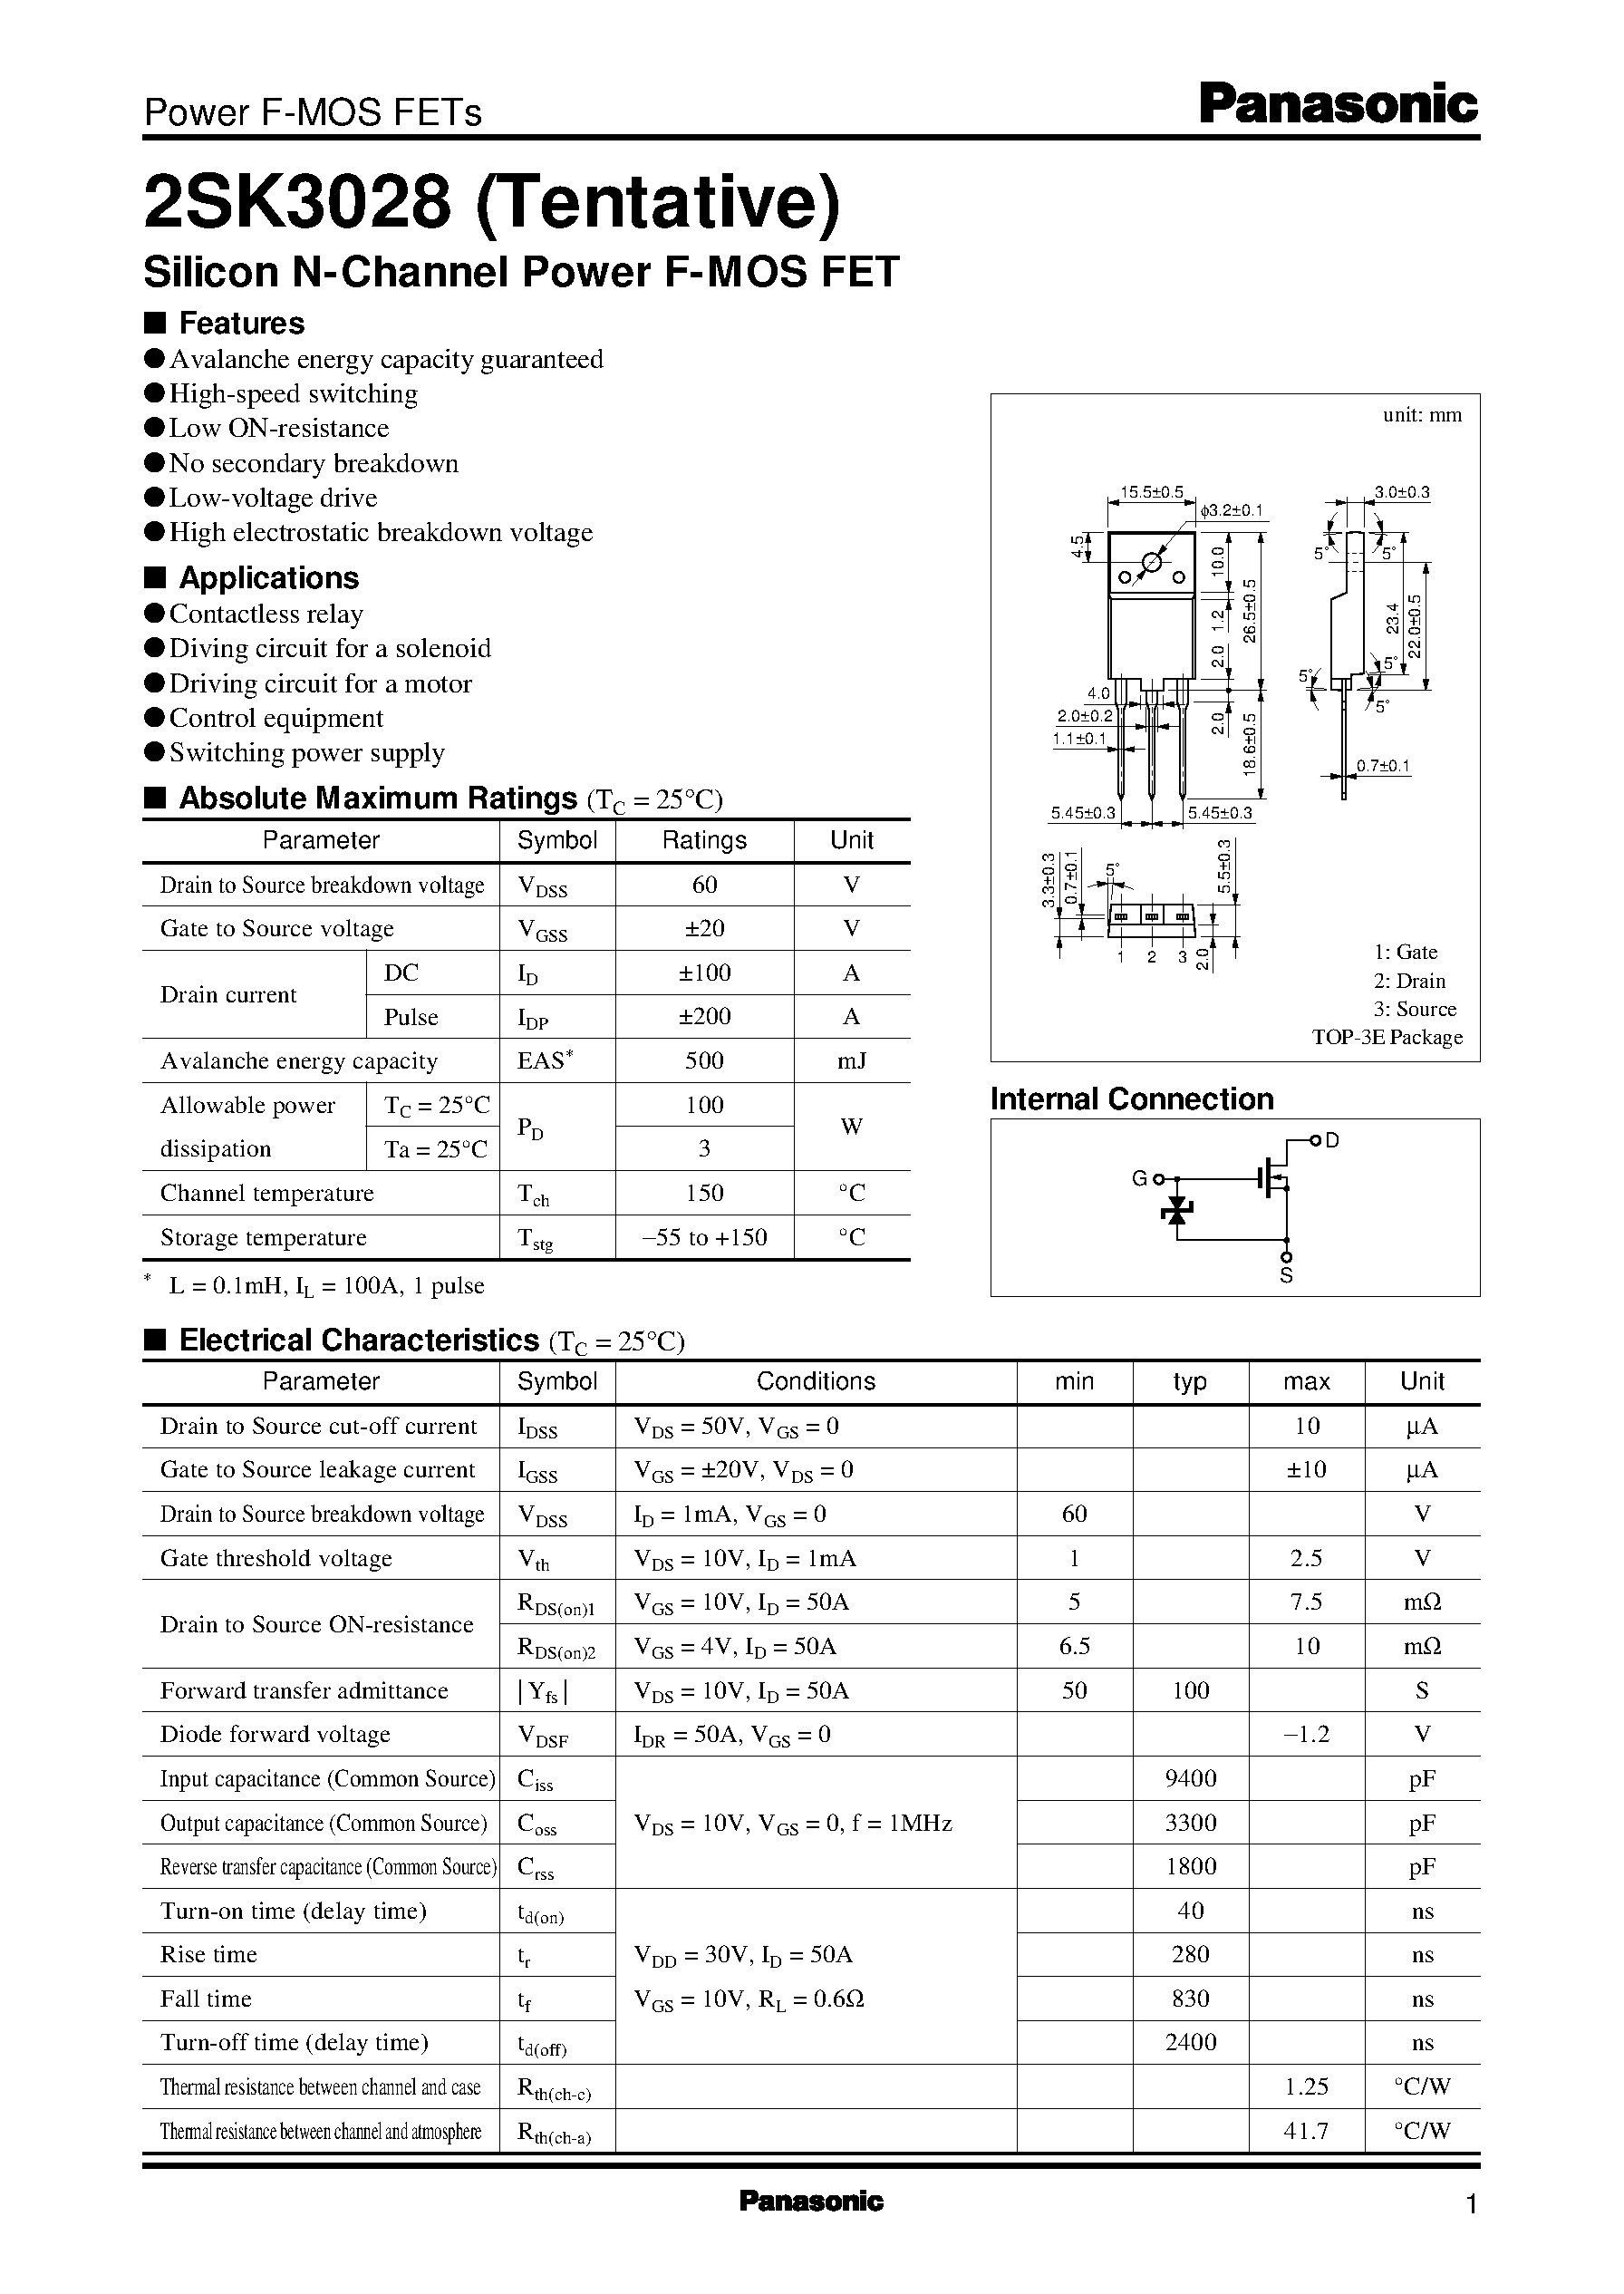 Datasheet 2SK3028 - Silicon N-Channel Power F-MOS FET page 1